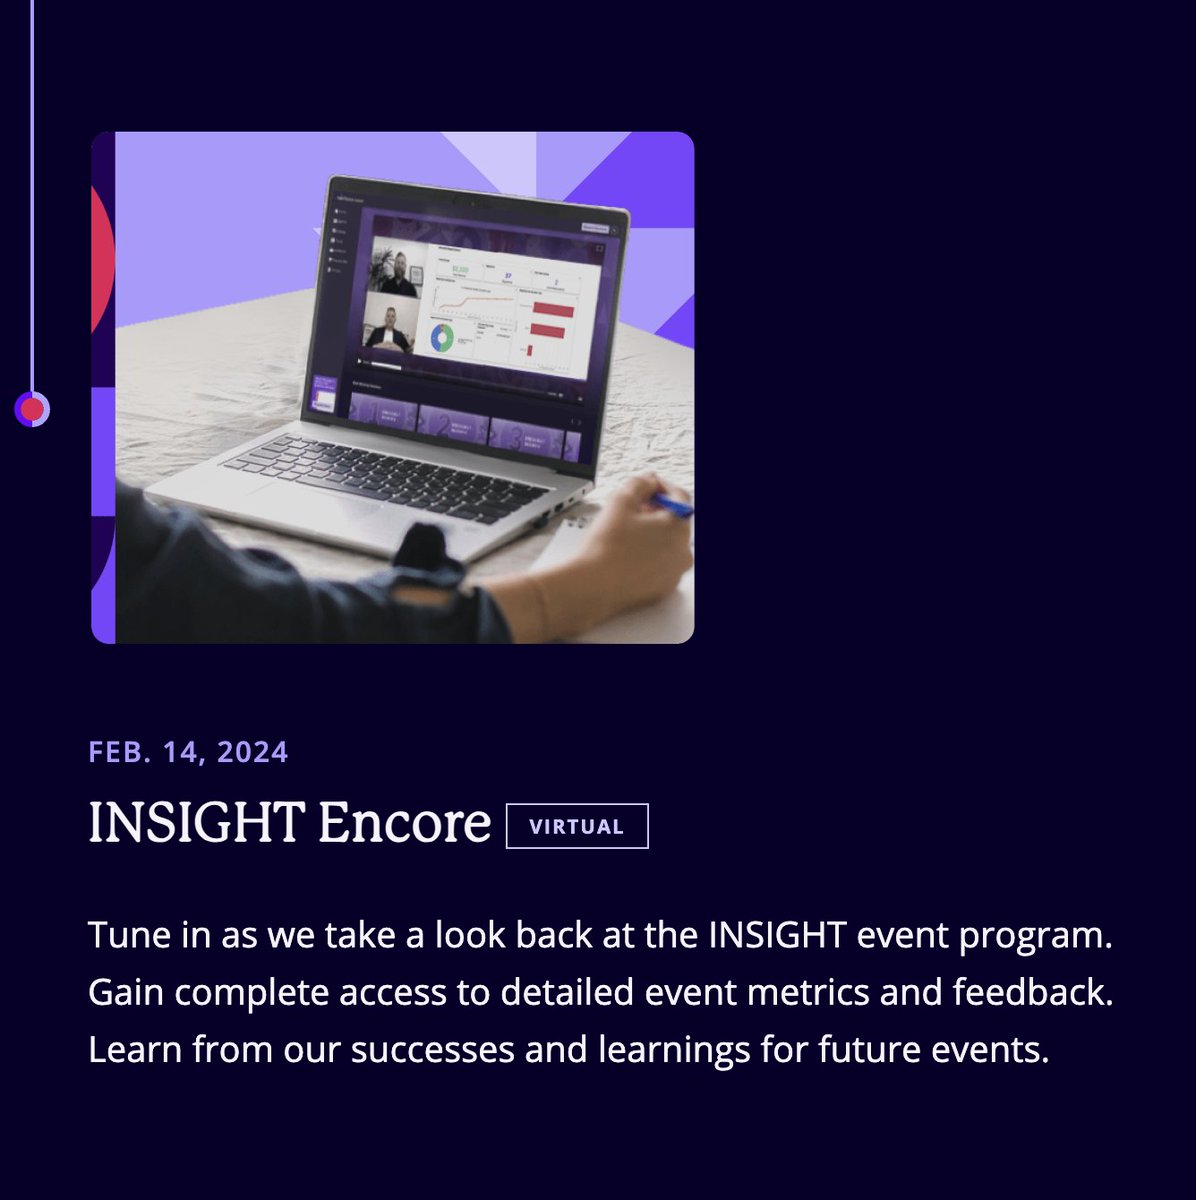 Don't forget to tune in for INSIGHT Encore, where we'll recap this year's event program, analyze INSIGHT data, and share how we measure our own #eventsuccess. Watch it live here. #RainFocusINSIGHT reg.rainfocus.com/flow/rfevents/…